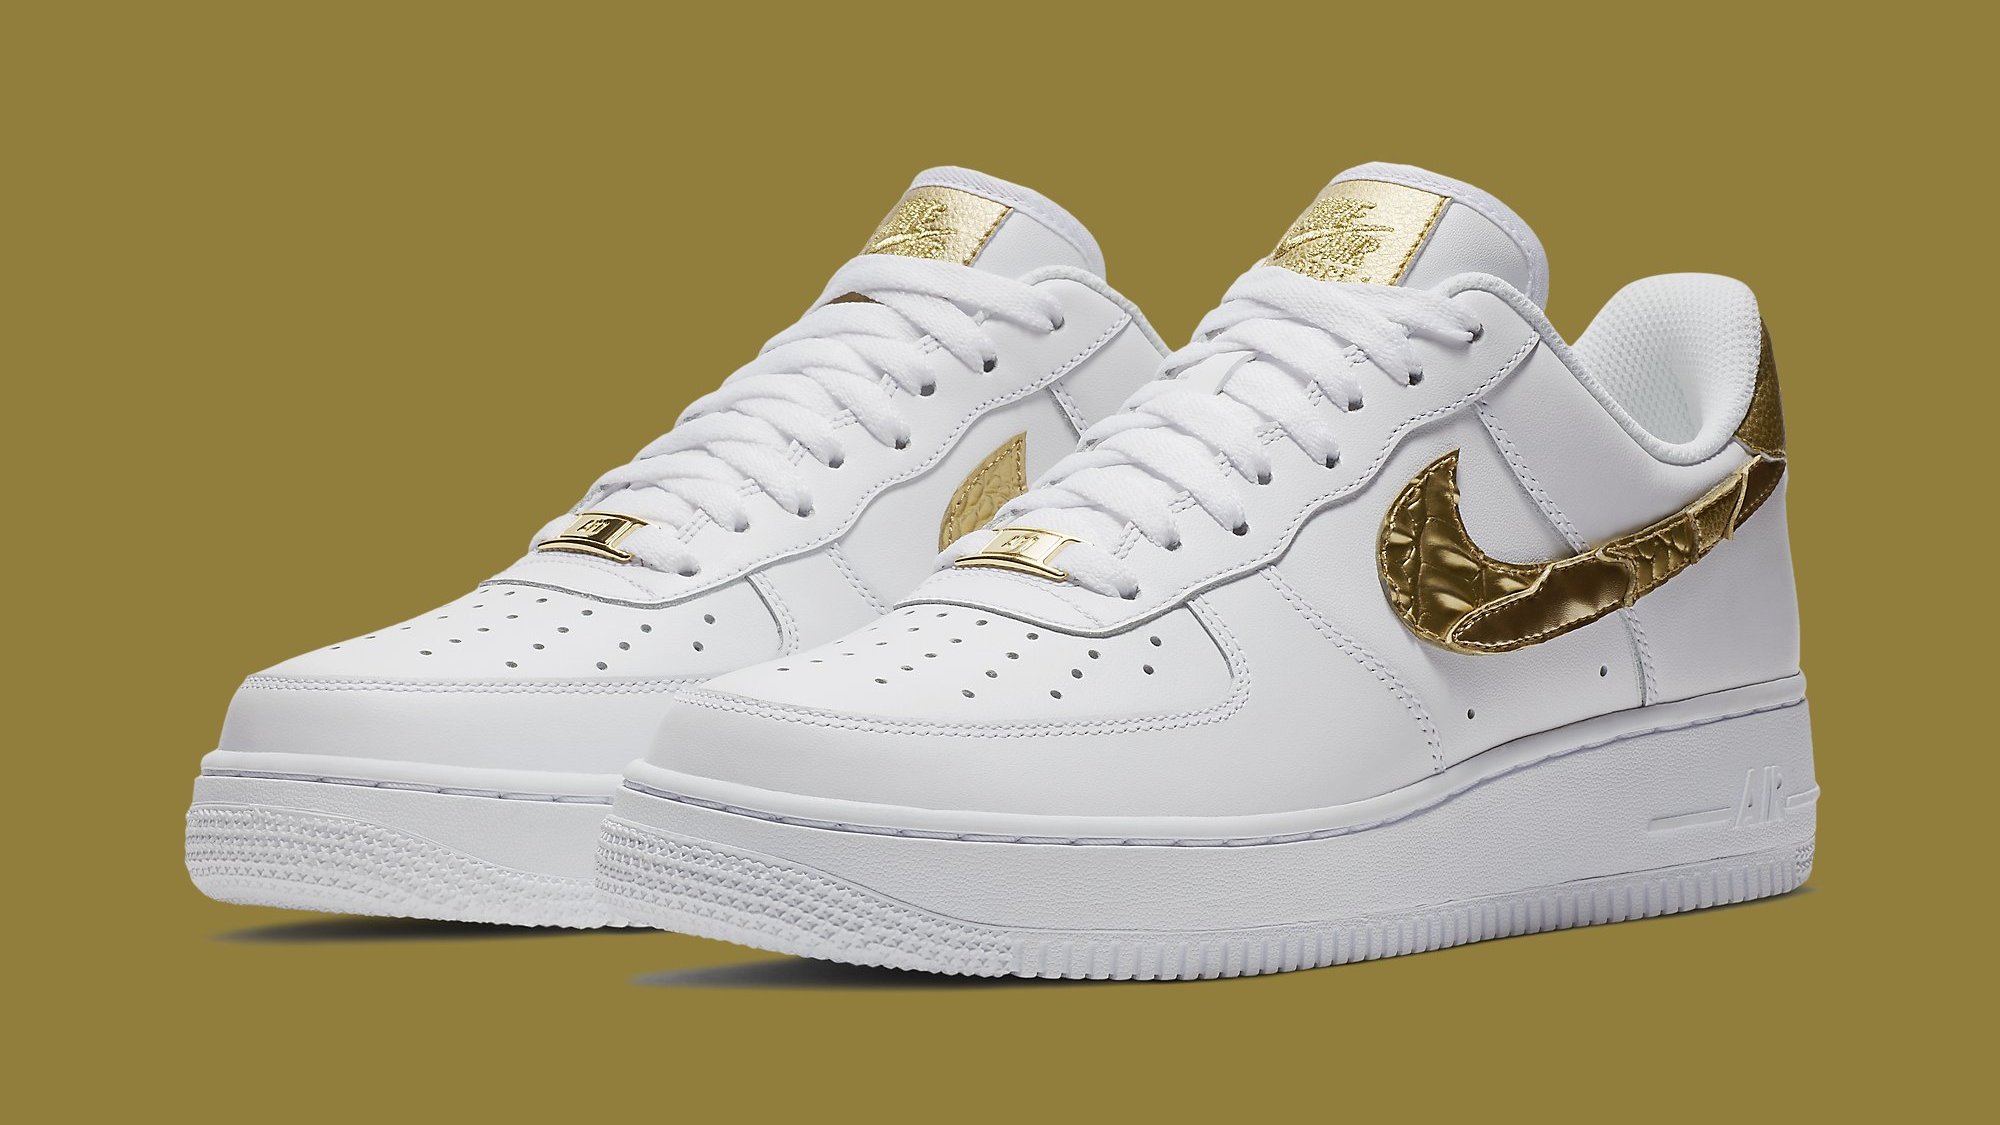 Cristiano Ronaldo Gets His Own Colorway Of The Nike Air Force 1